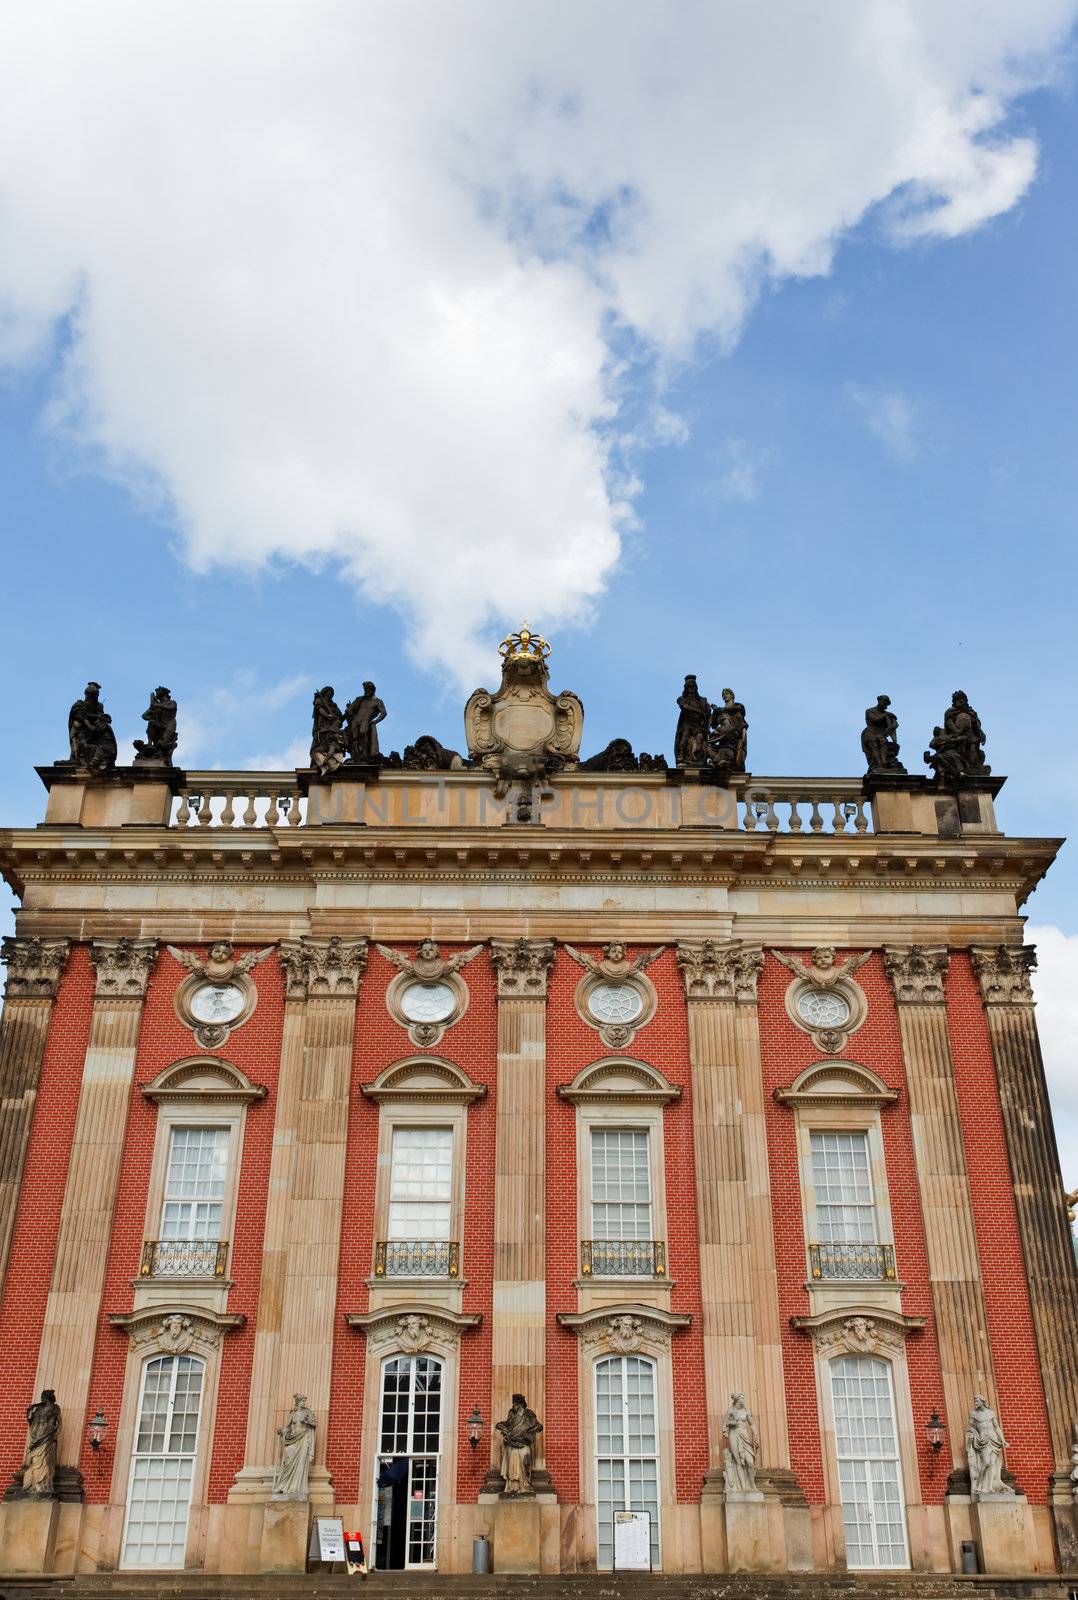 The New Palace in Potsdam Germany by gary718